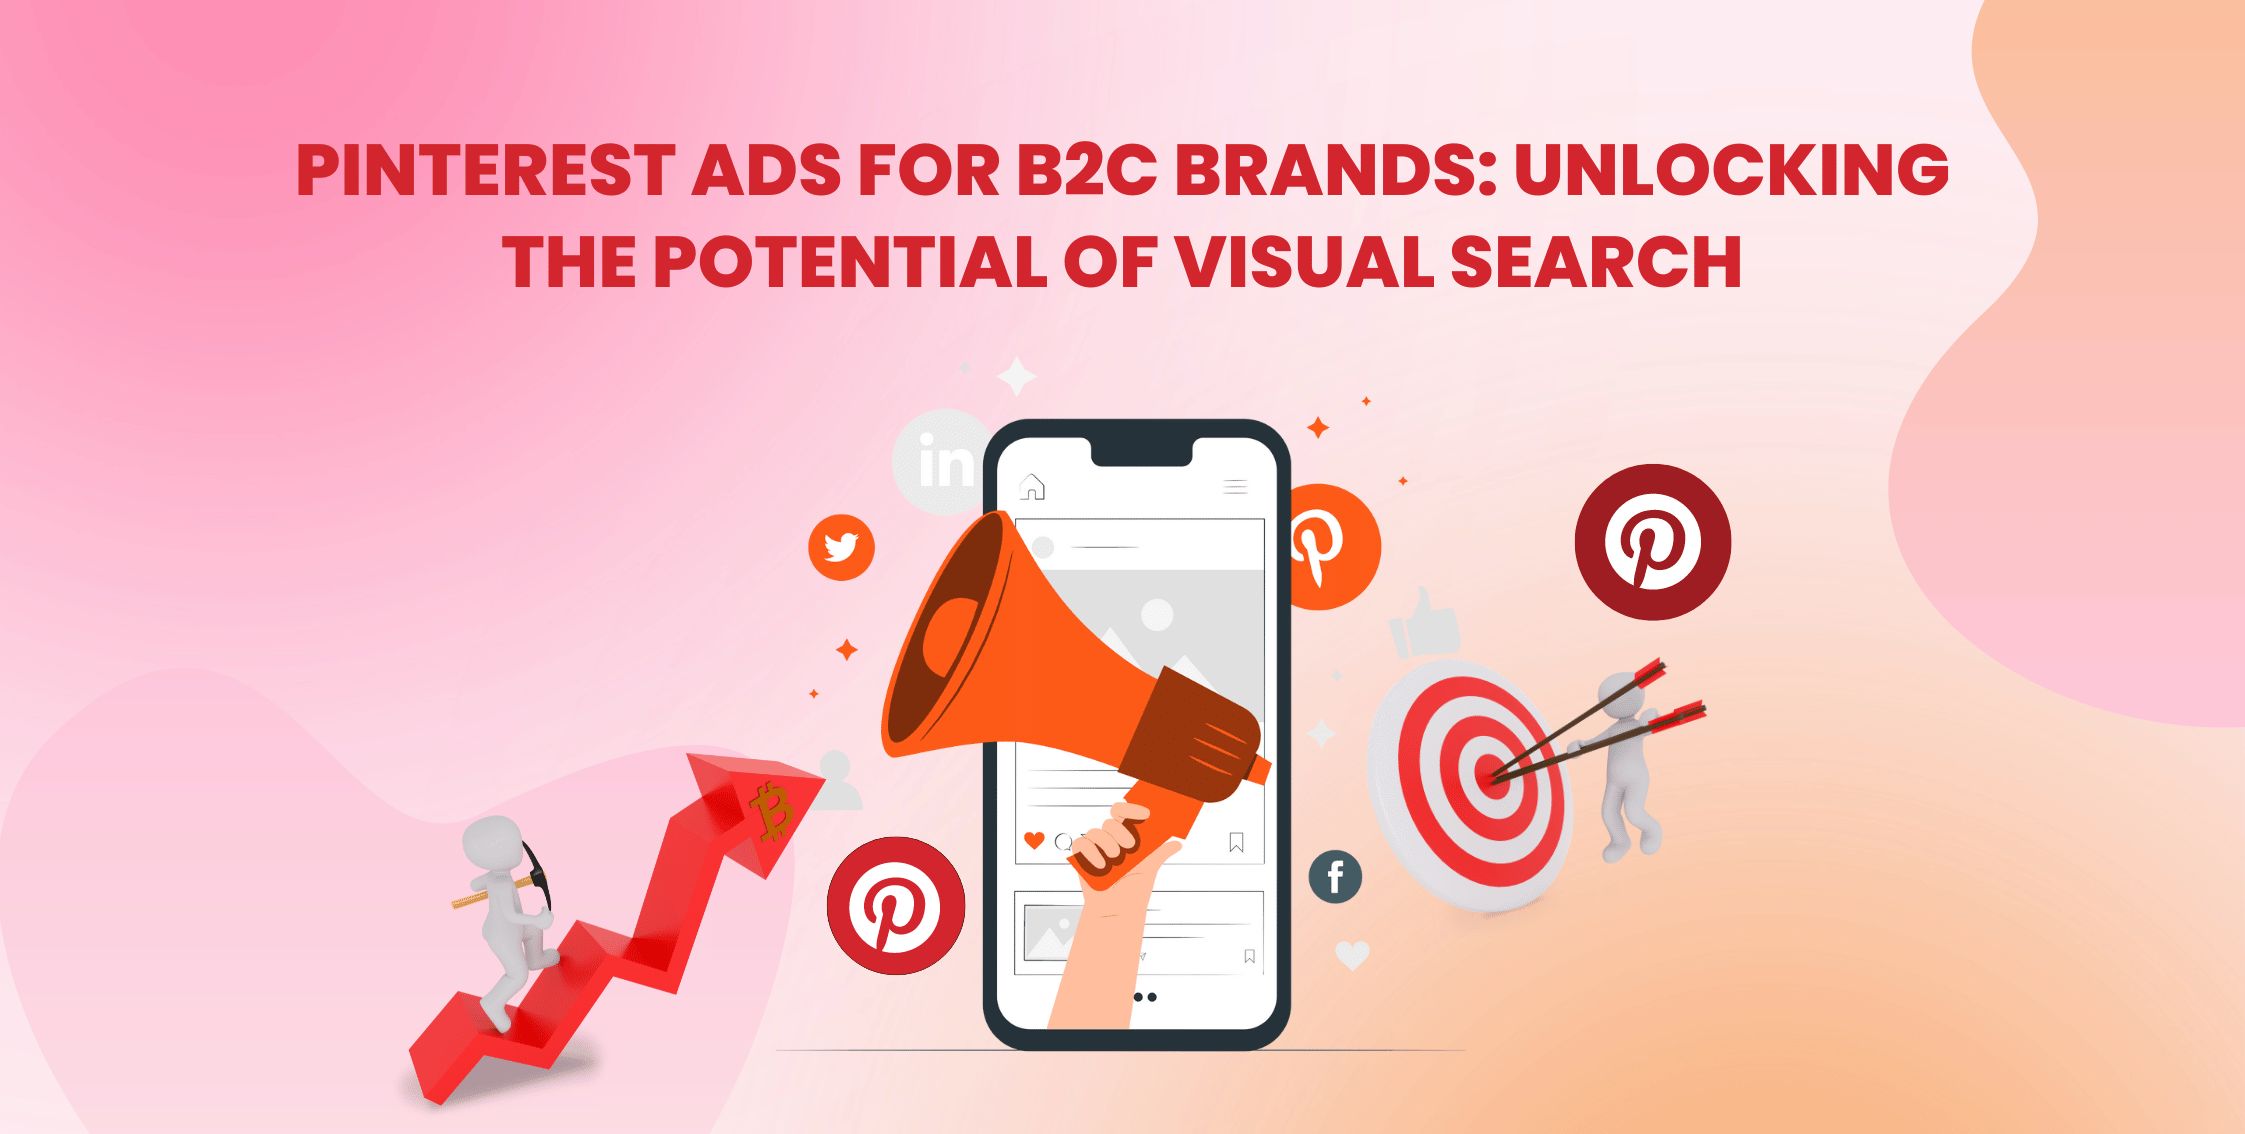 Pinterest Ads for B2C Brands: Unlocking the Potential of Visual Search